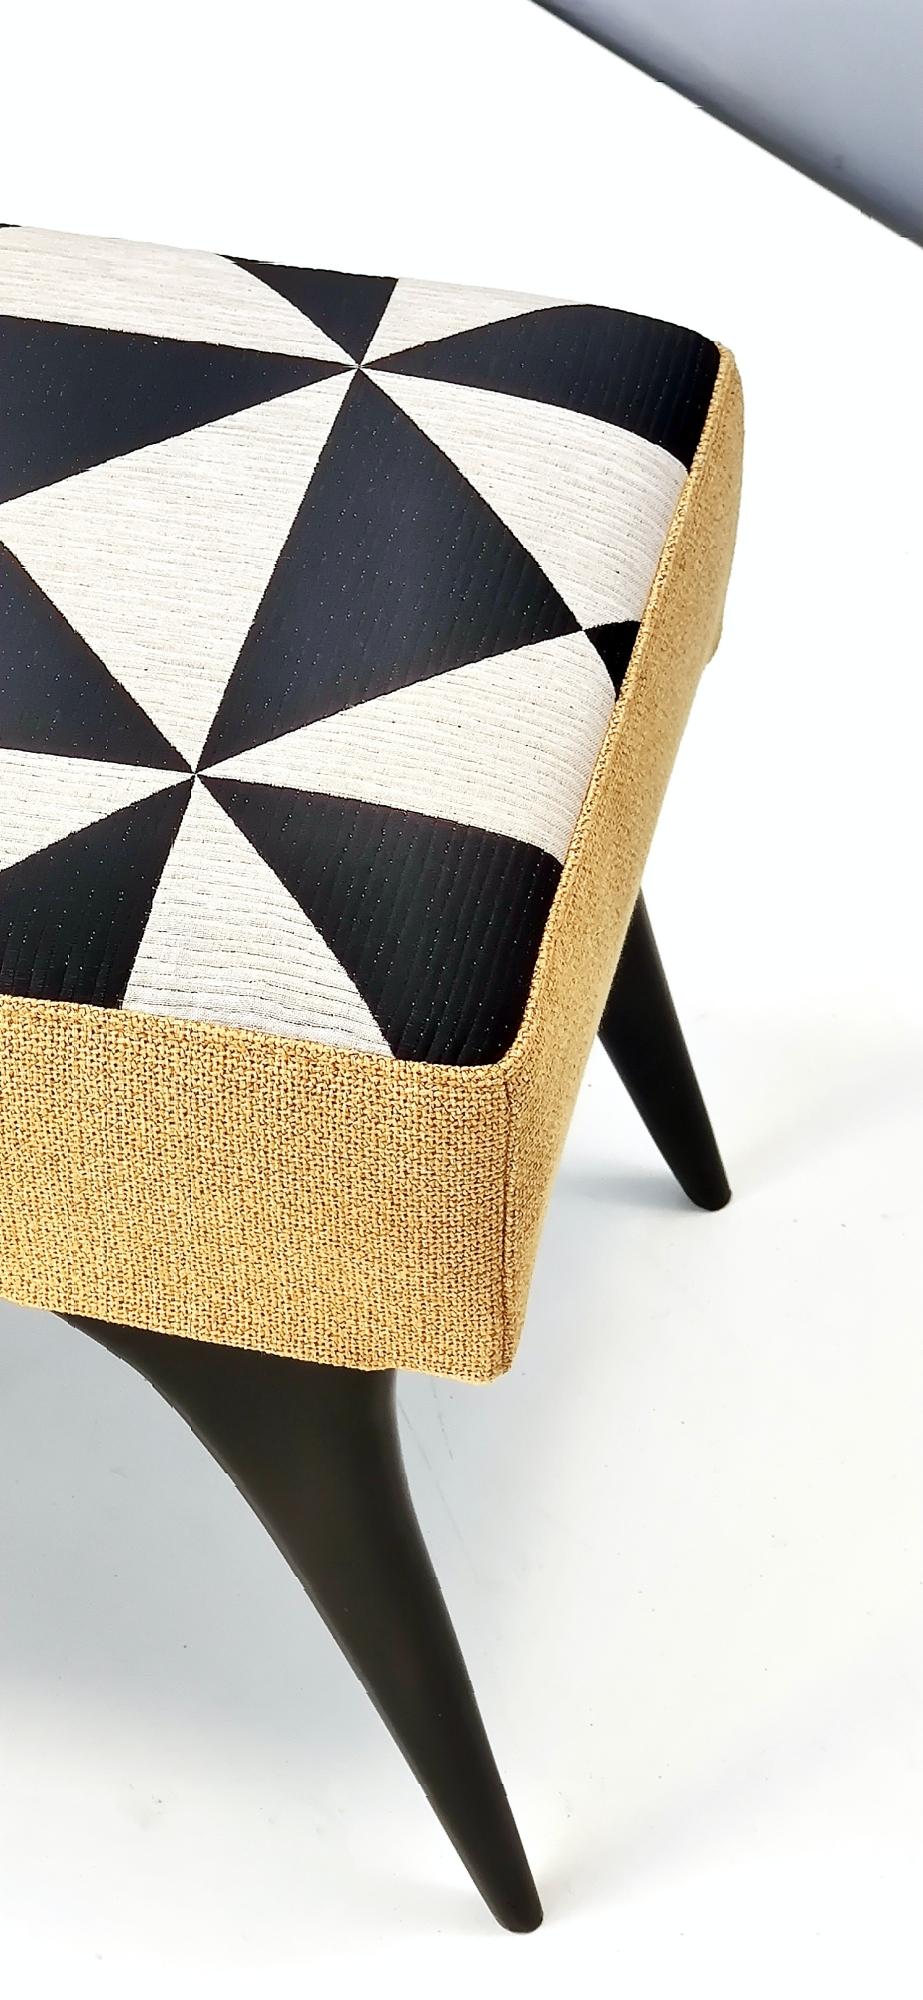 Mid-20th Century Midcentury Pouf with Black, White and Yellow Fabric, Italy